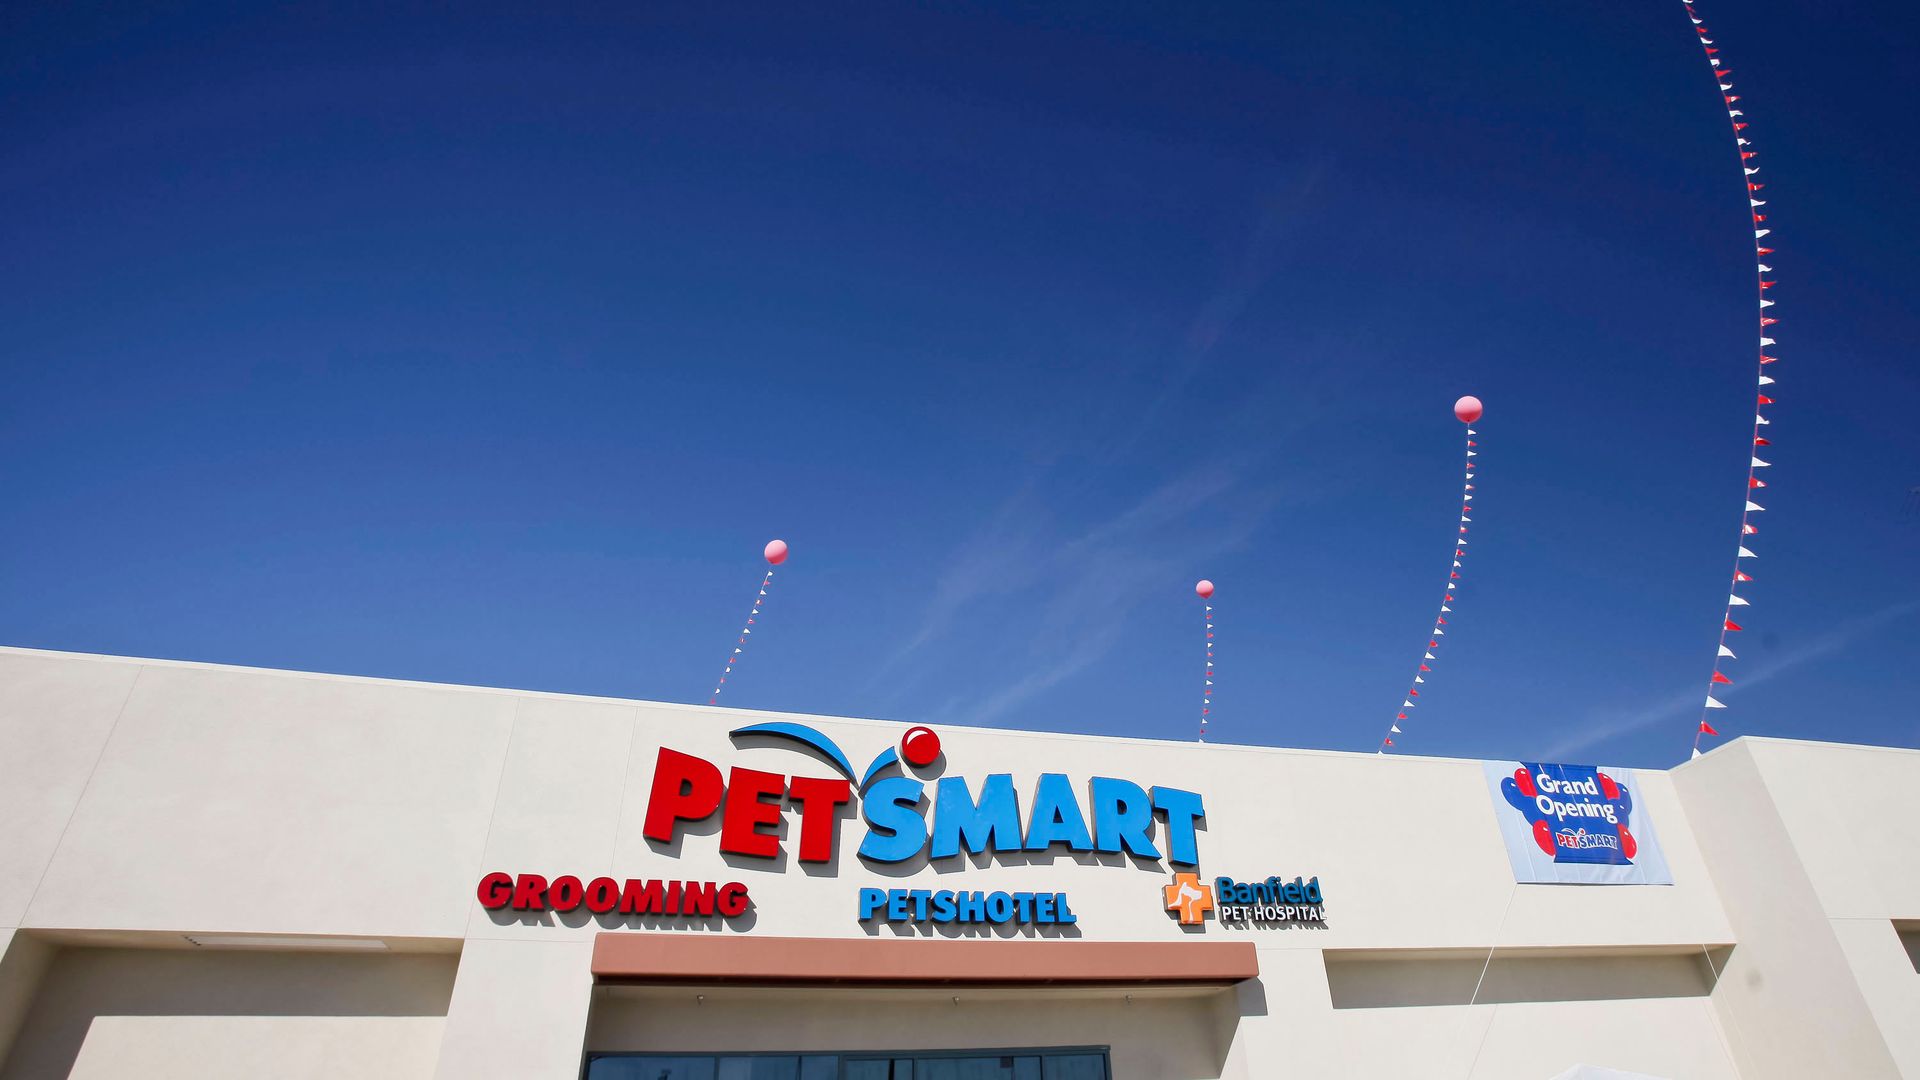 PetSmart store with balloons in the air.